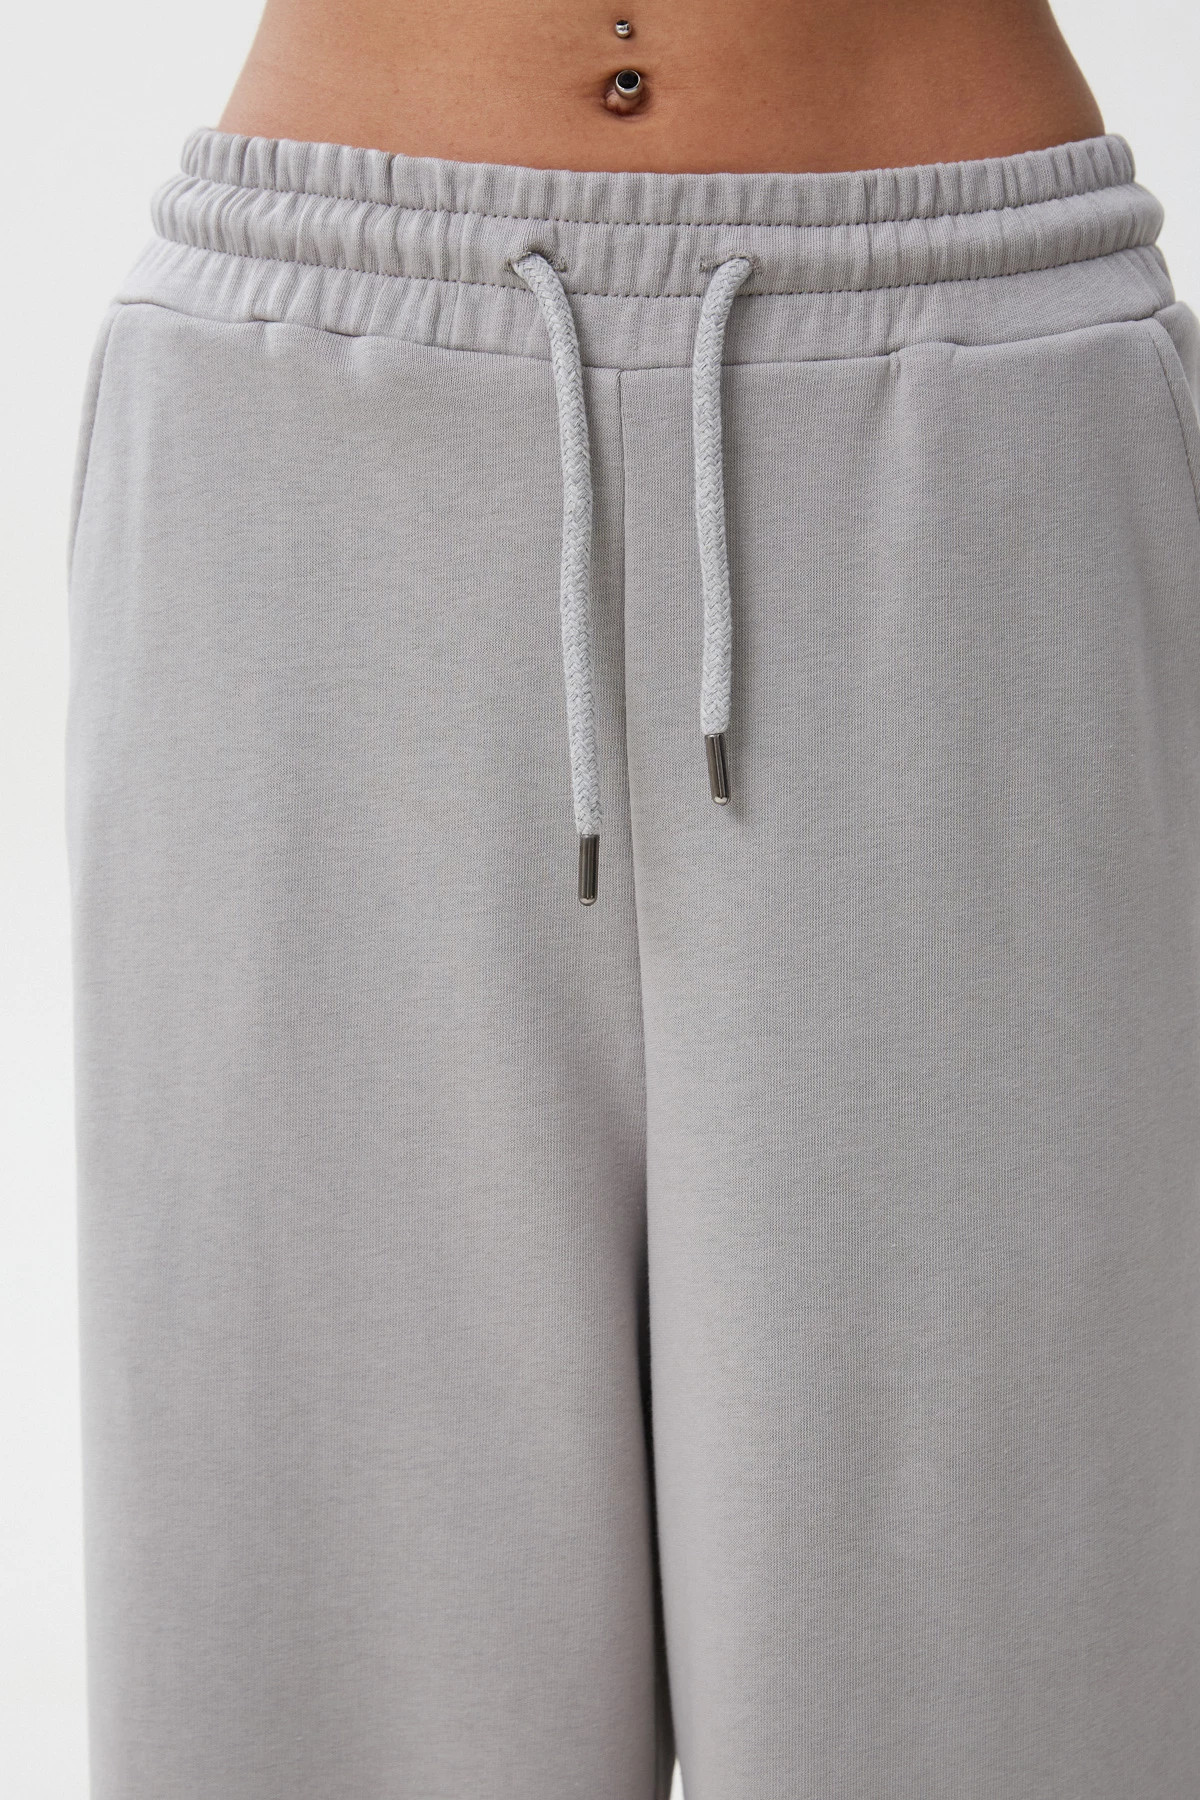 Grey loose fit jersey pants, photo 3